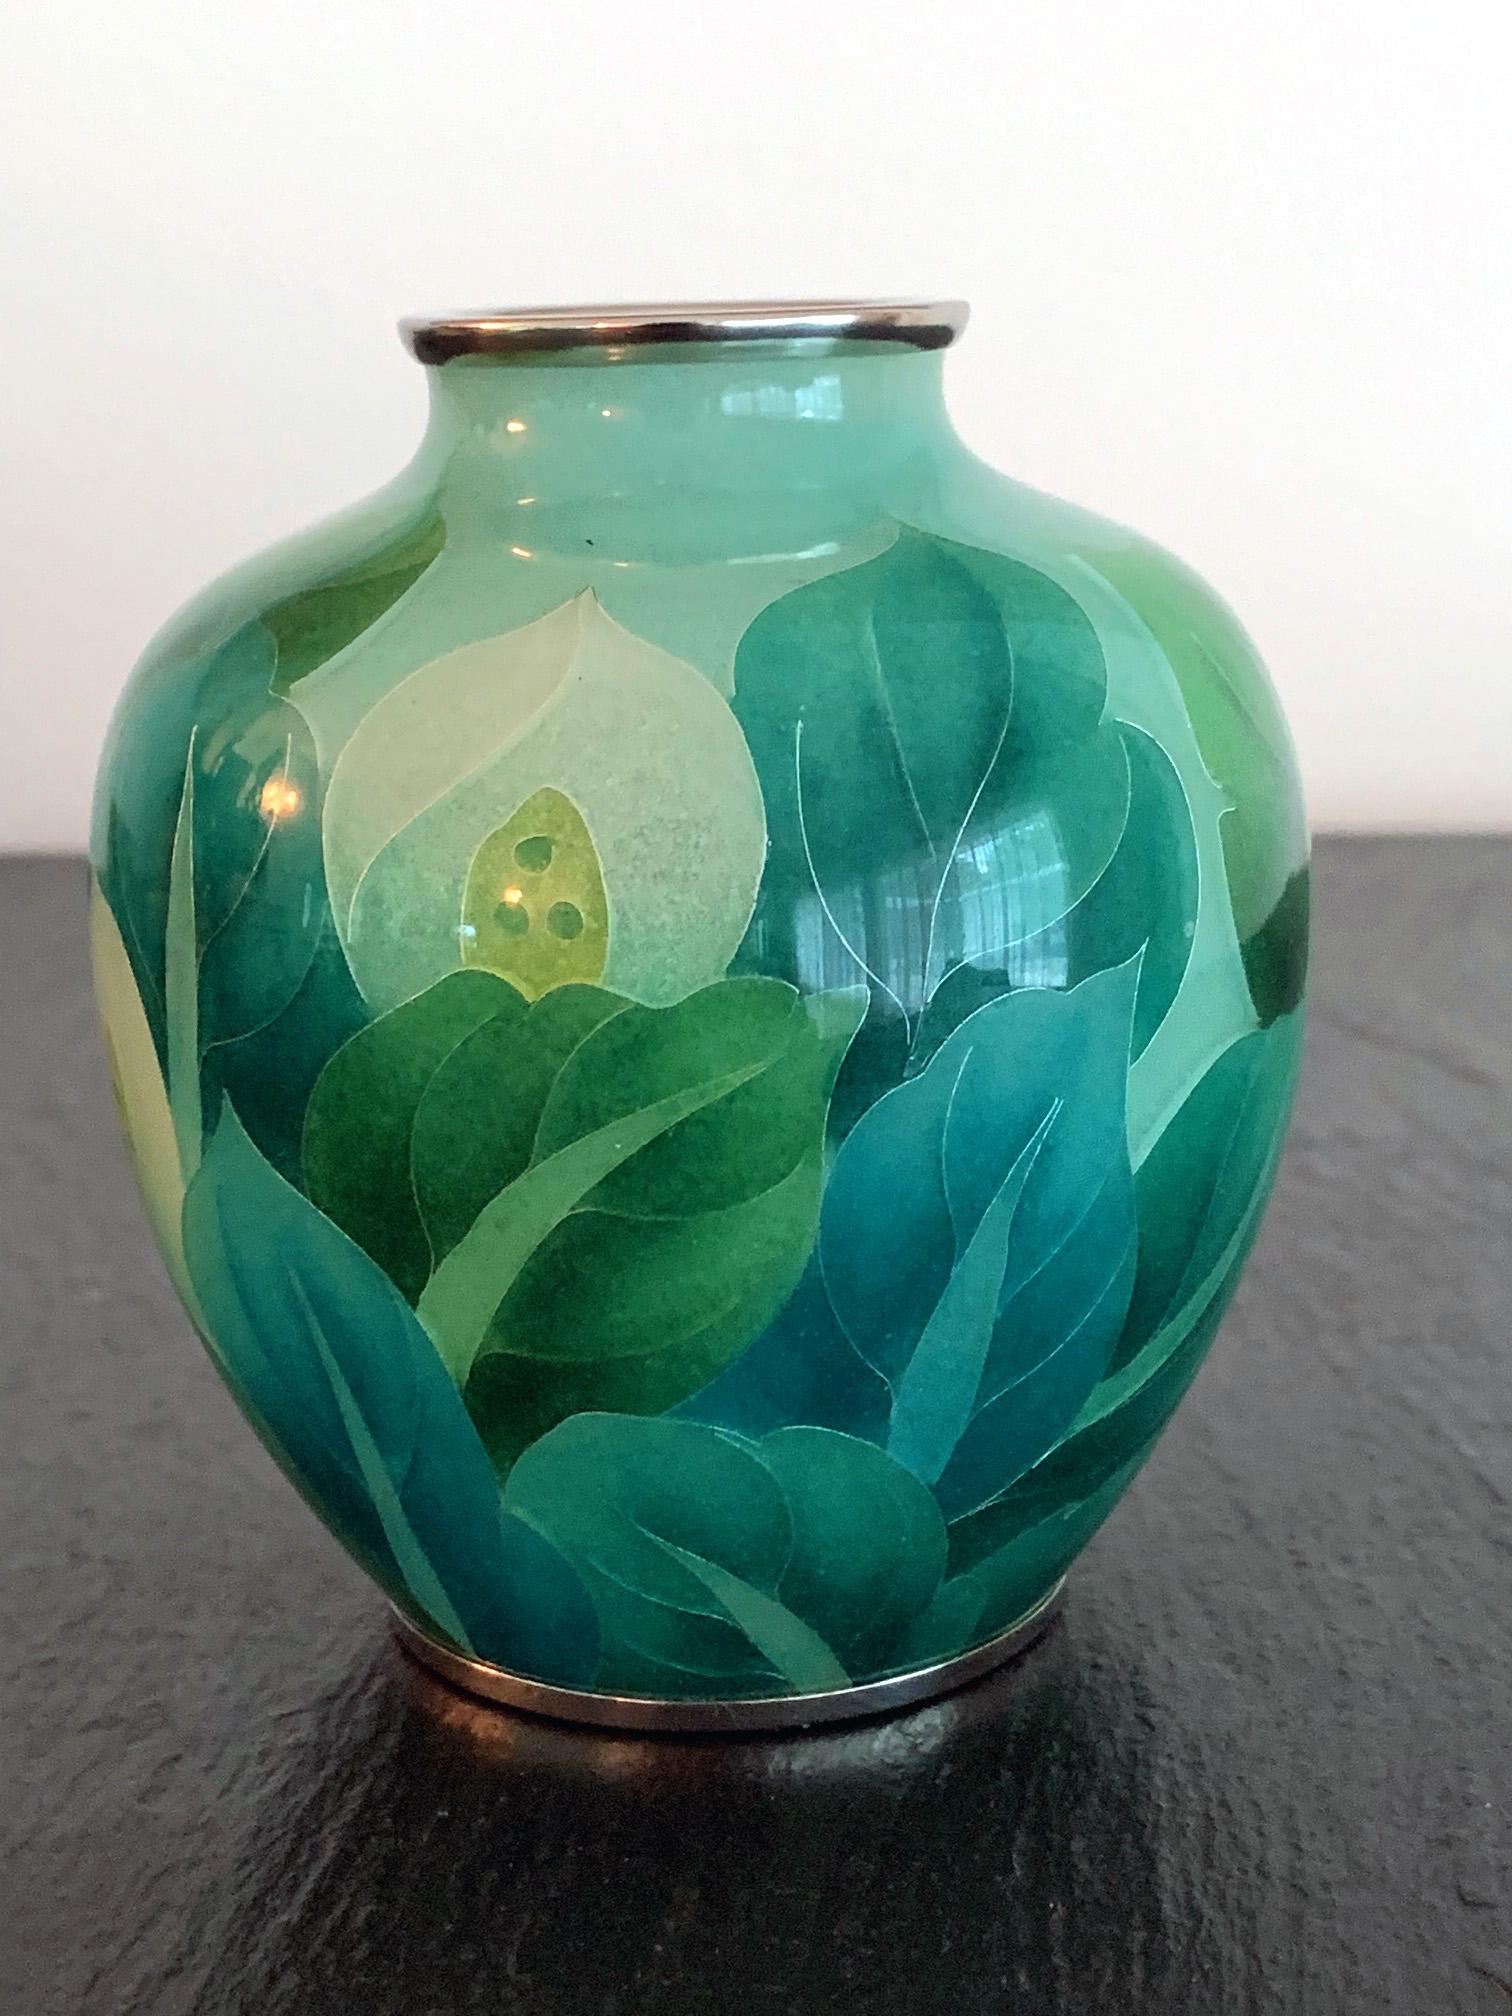 An exquisite plique-à-jour cloisonne vase by Ando Company, likely mid-late 20th century. A work of art, this baluster shaped vase is crafted with the most refined designs and technique. The pattern features large bundles of white calla lilies and